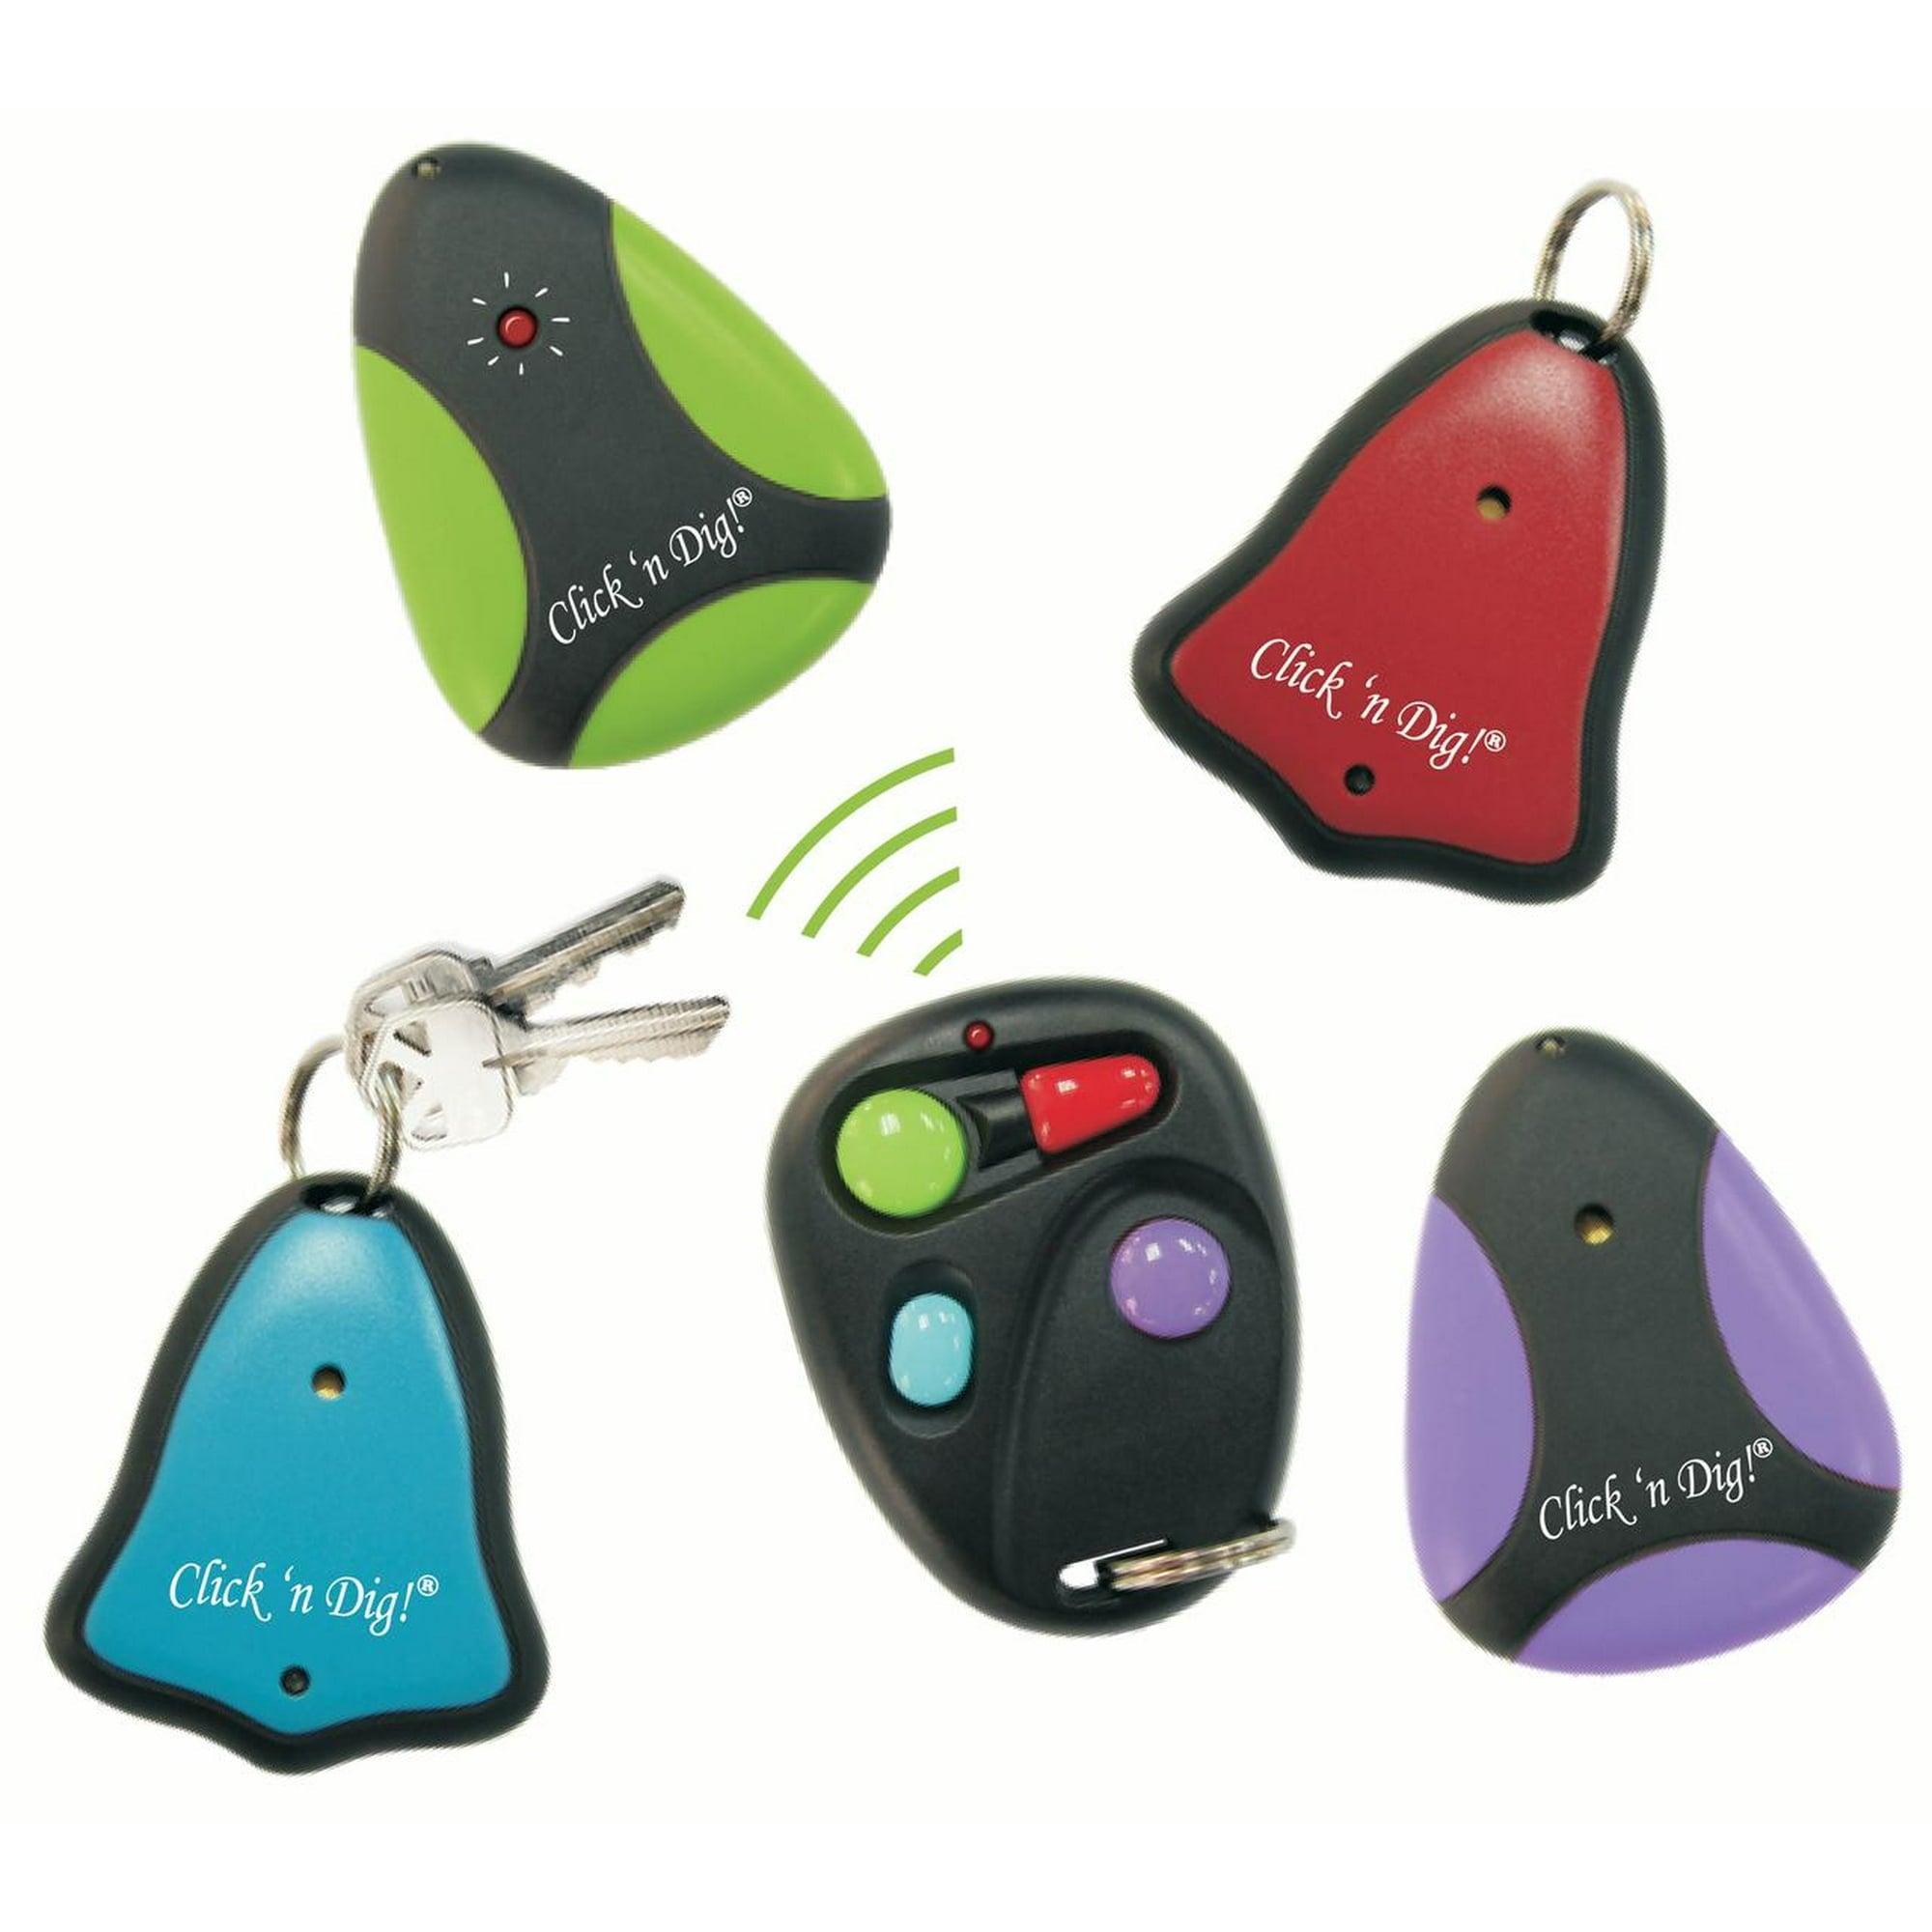 ClicknDig Click 'n Dig Model E4 Radio Frequency Electronic Key Finder, 4 Receivers